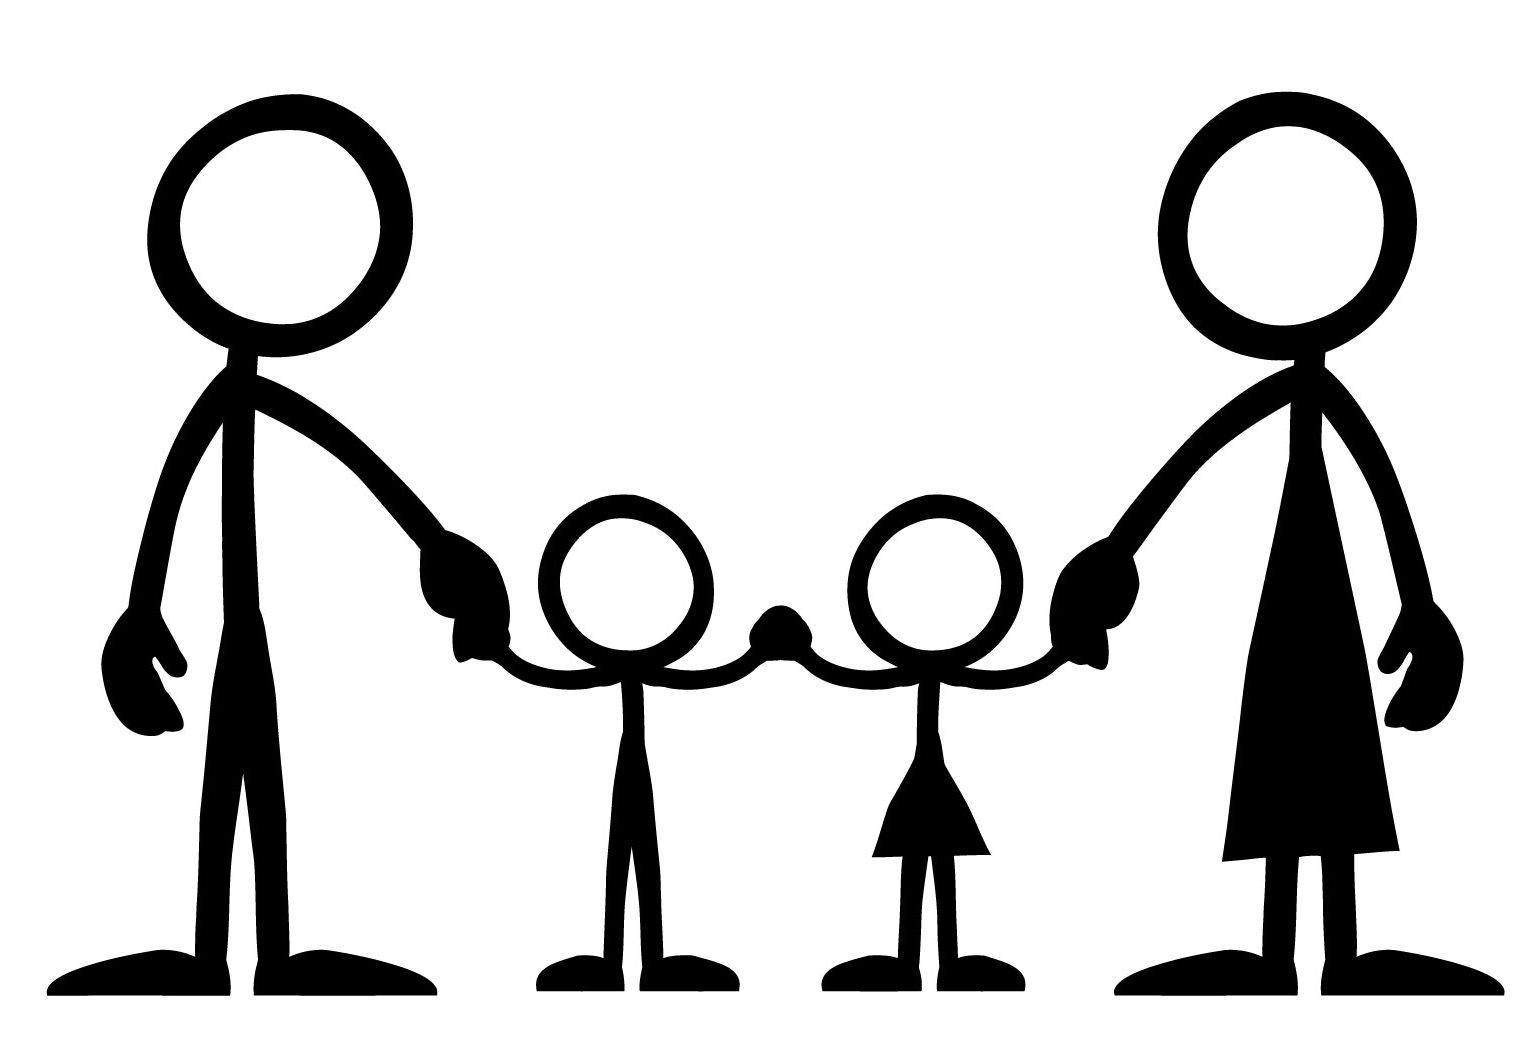 Clip Arts Related To : stick figure family clip art. 